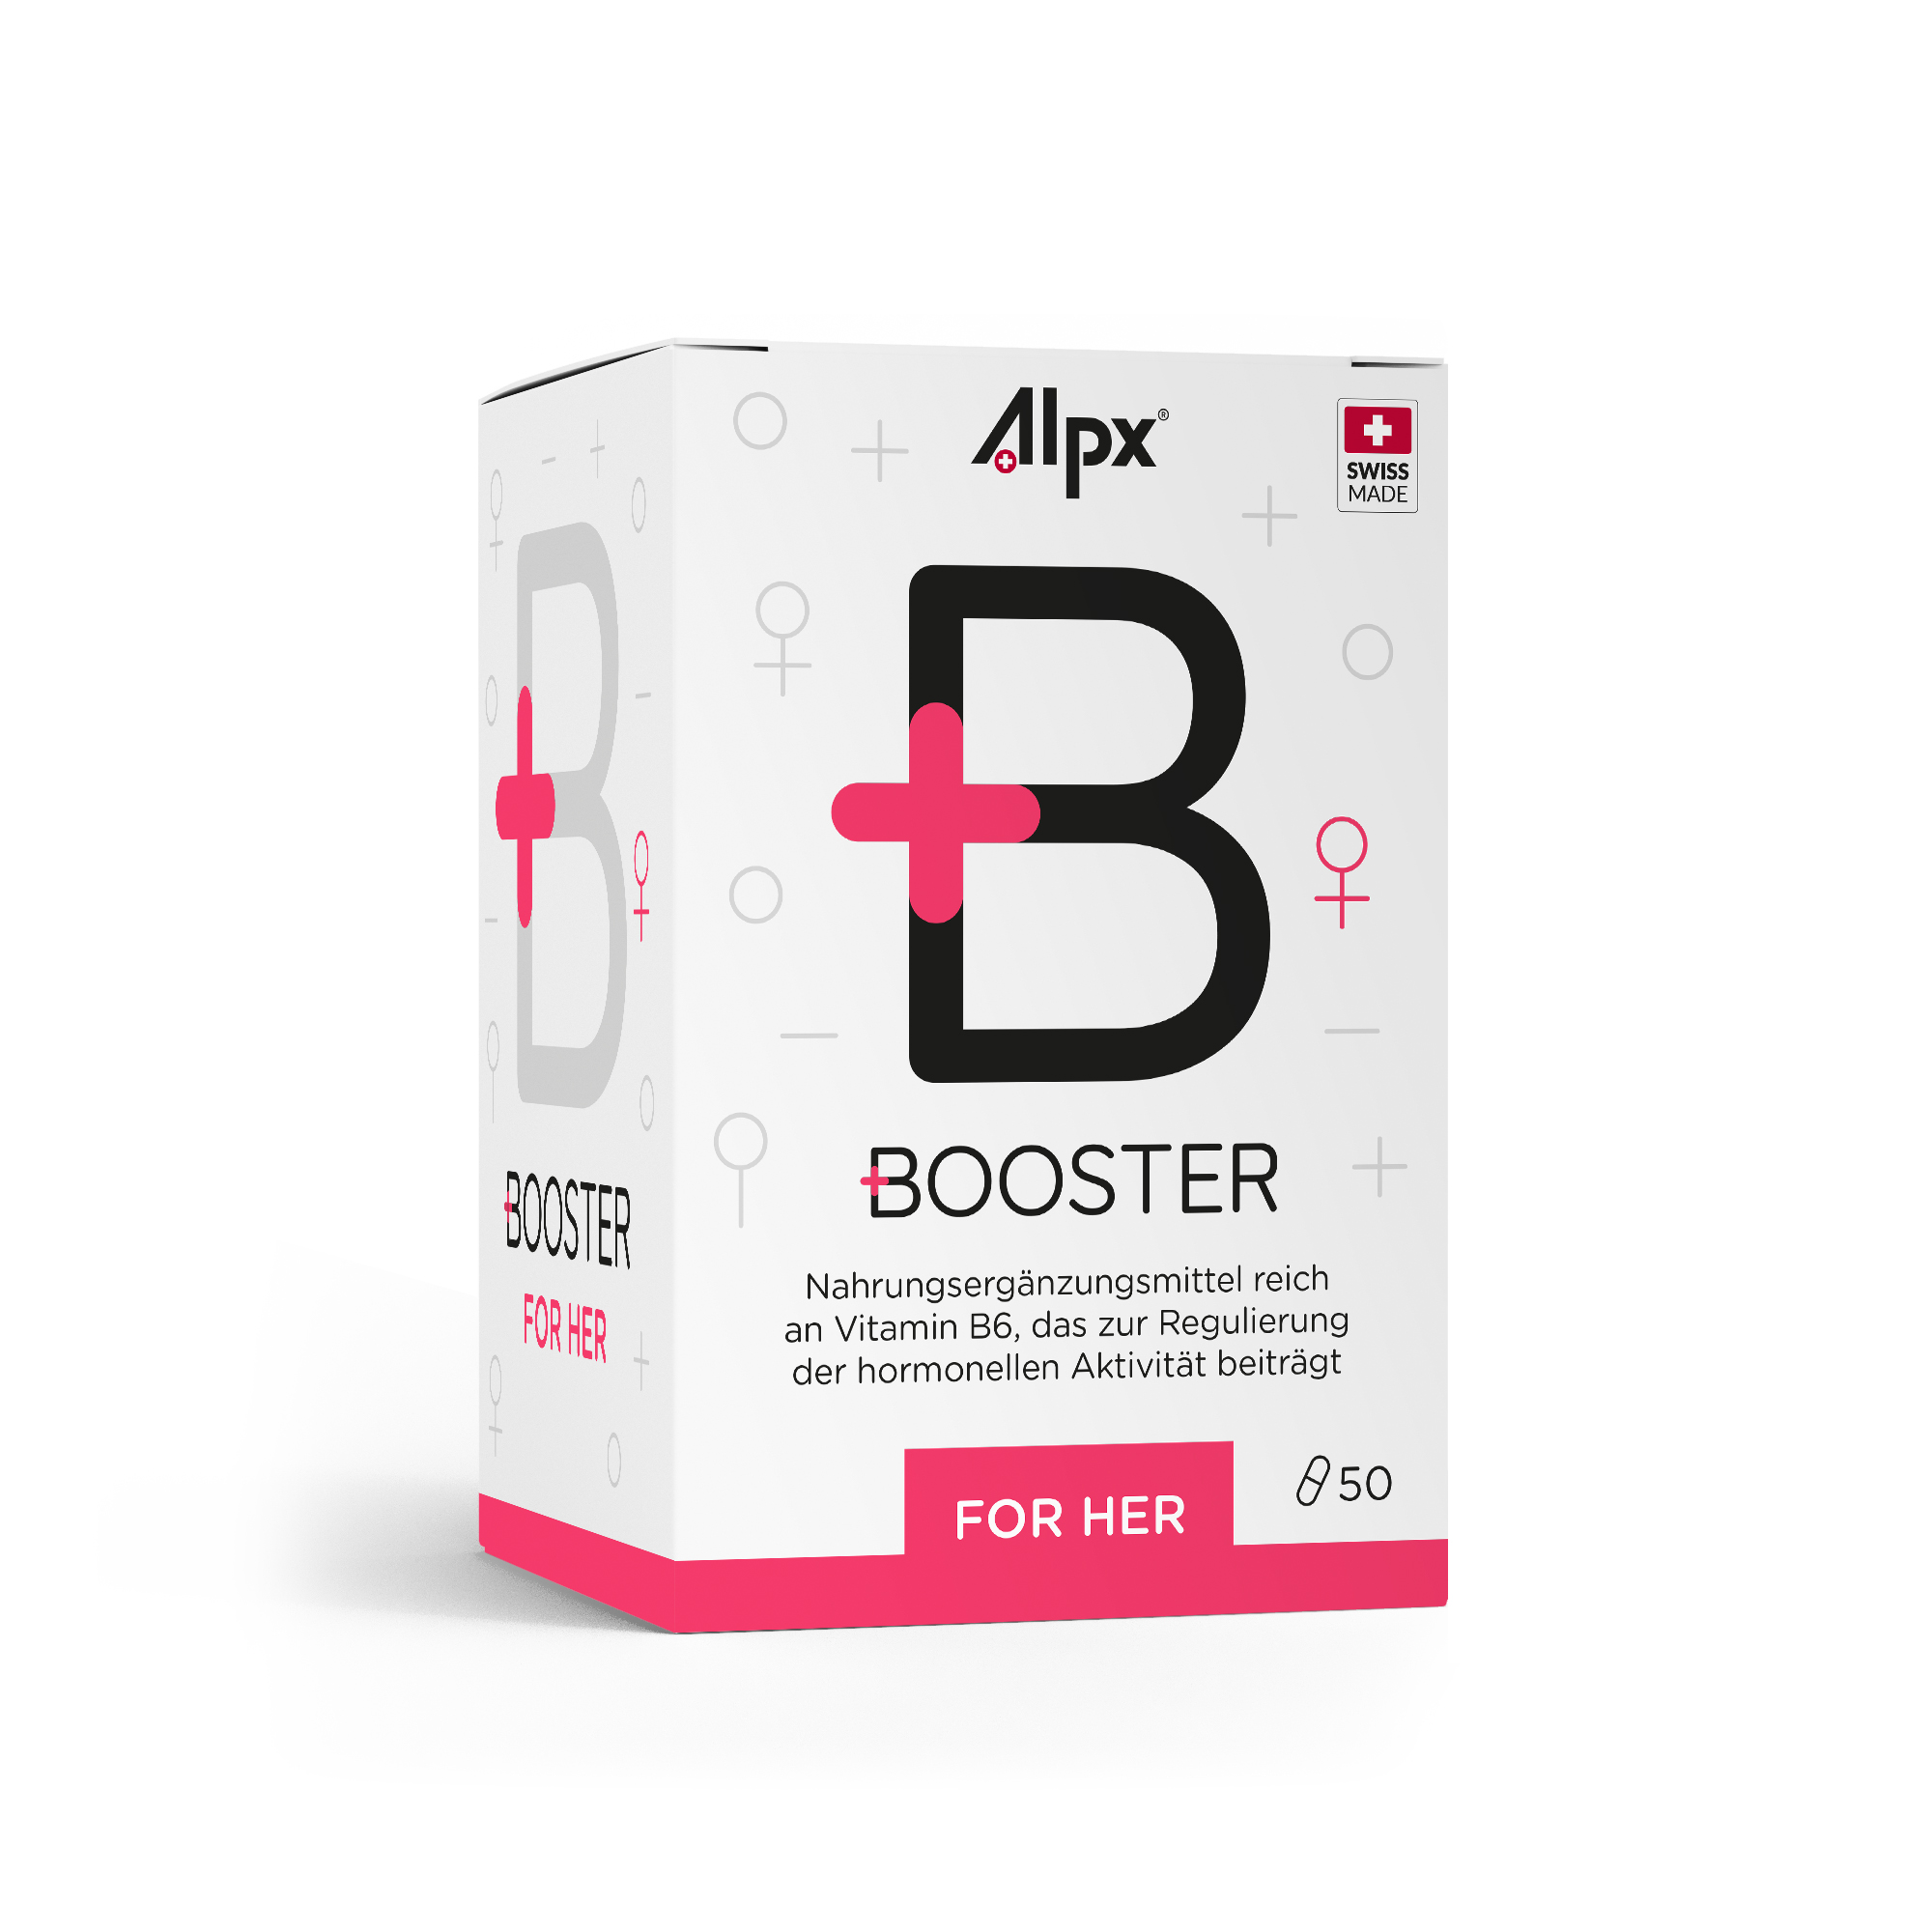 ALPX Booster for her (50 Kapseln)